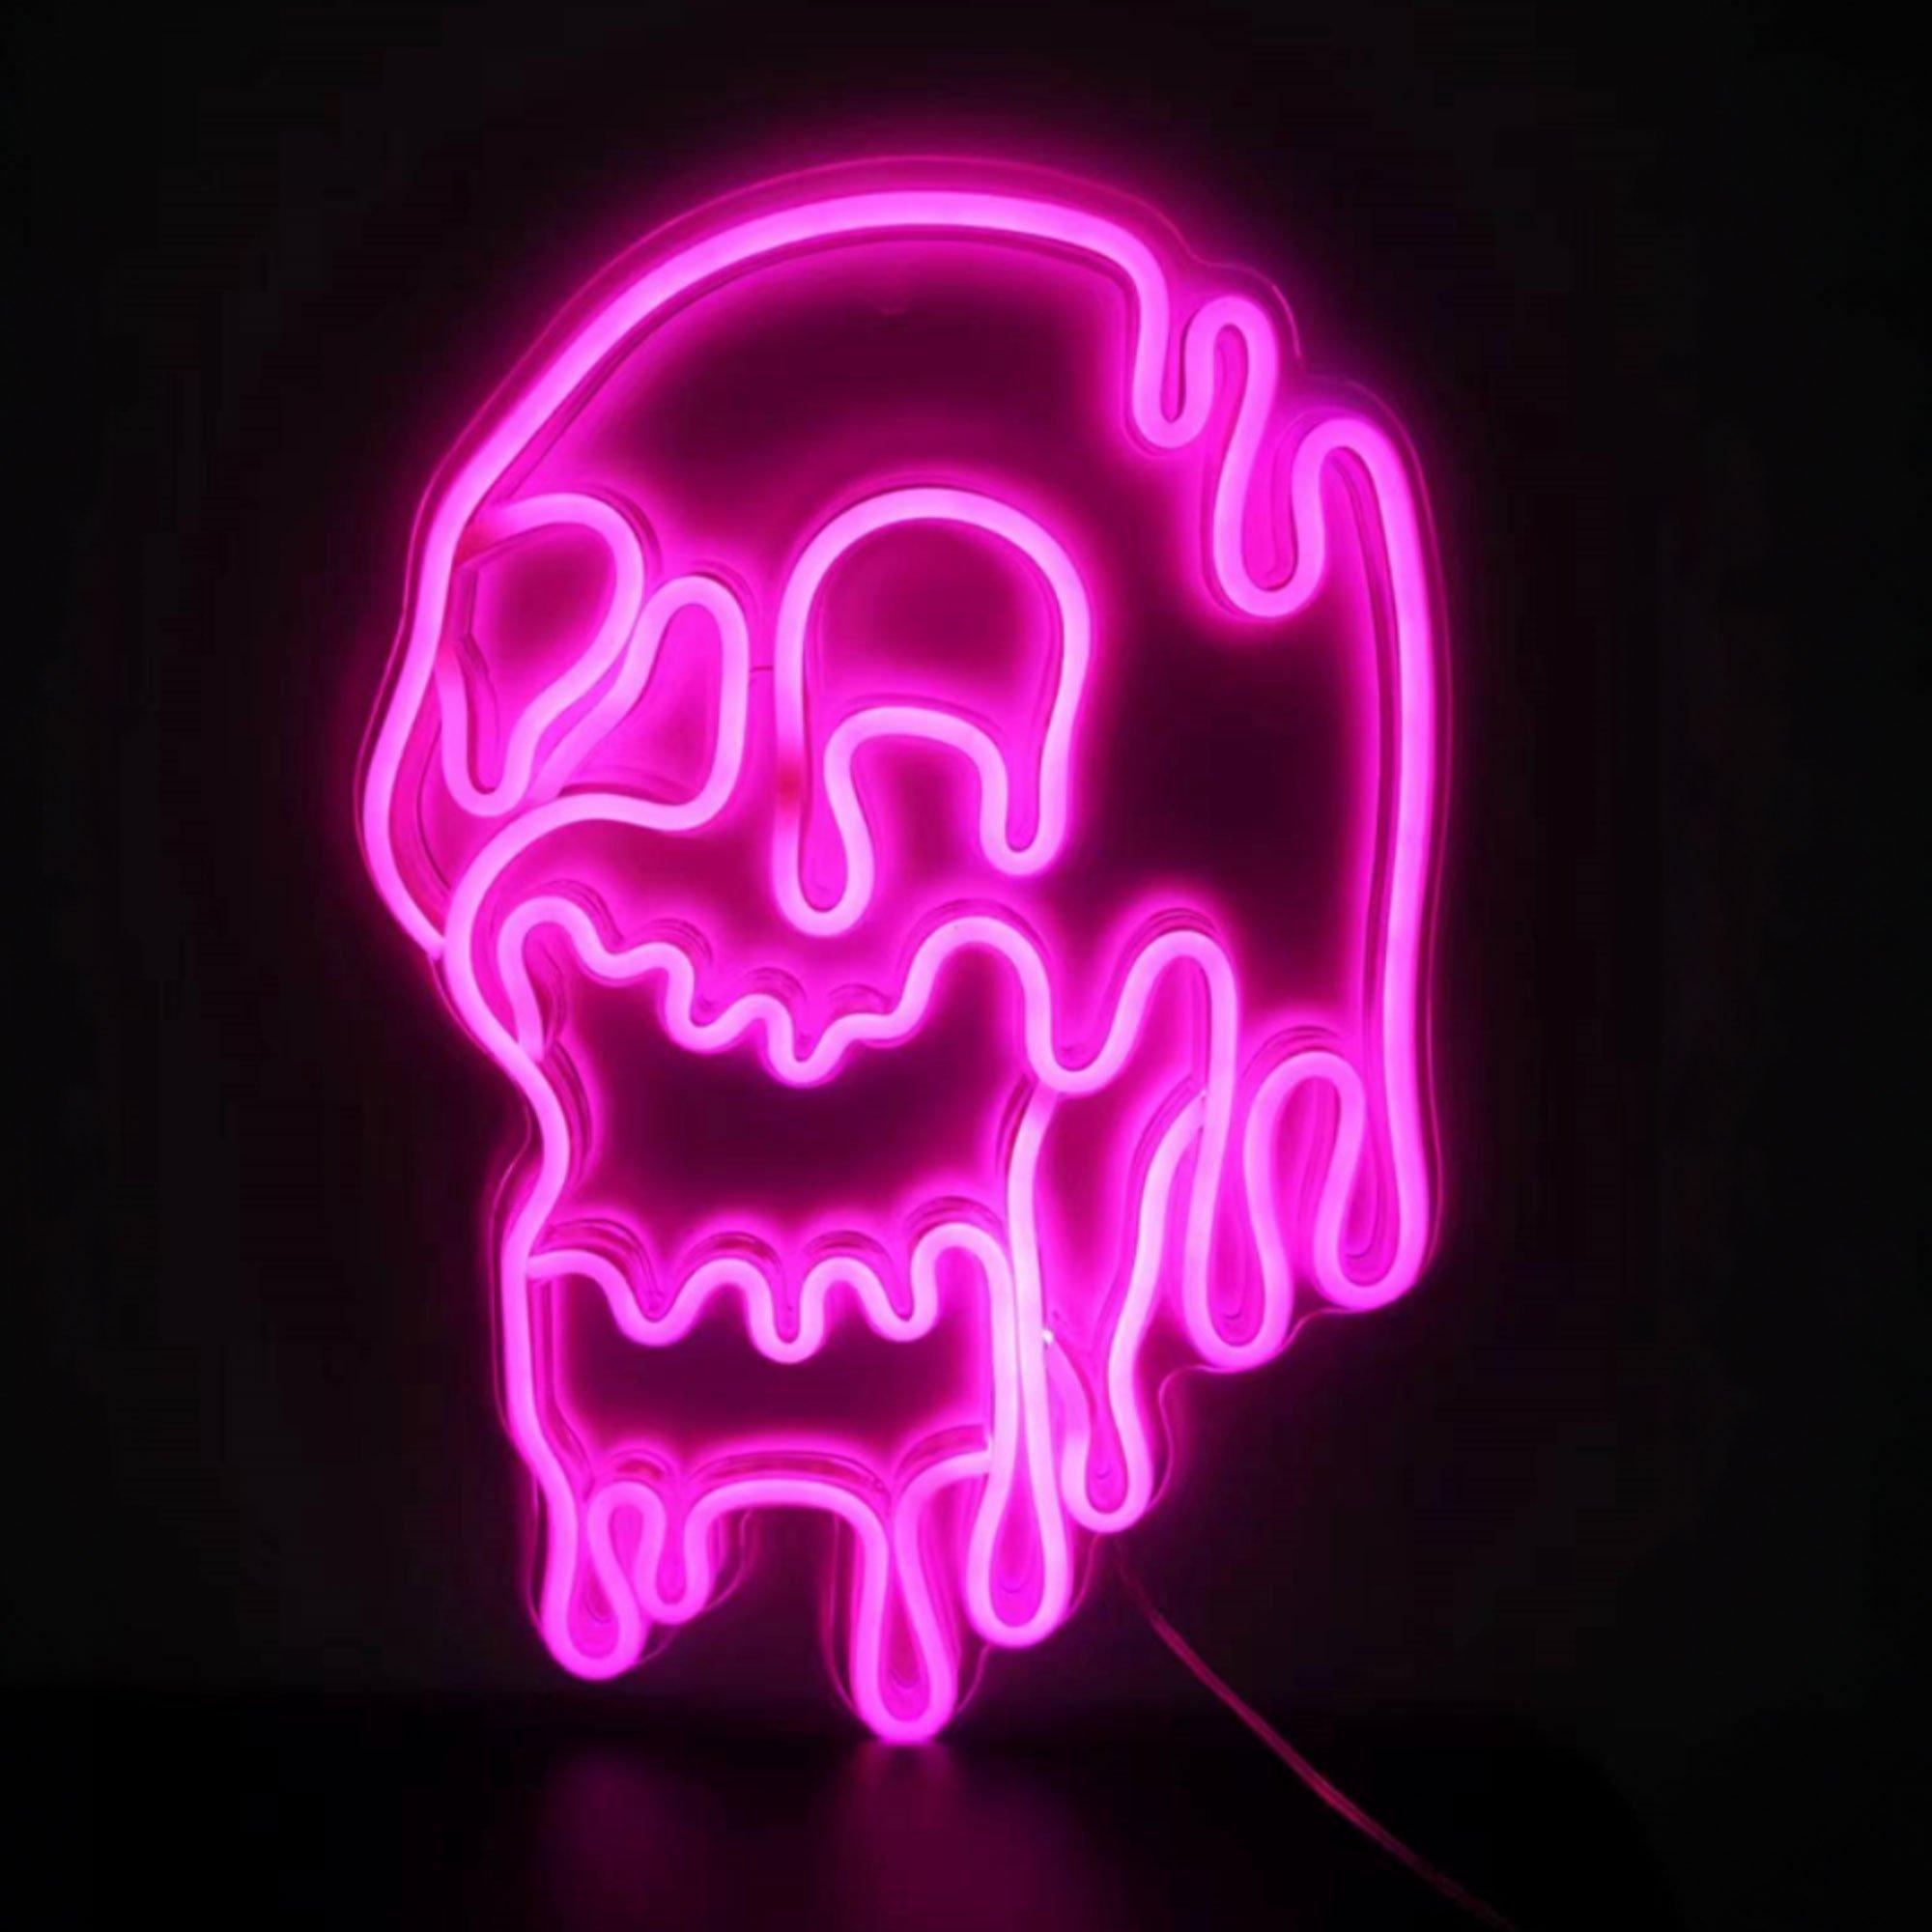 Light-Up Dripping Pink Skull Faux-Neon Sign, 9.8in x 14.5in